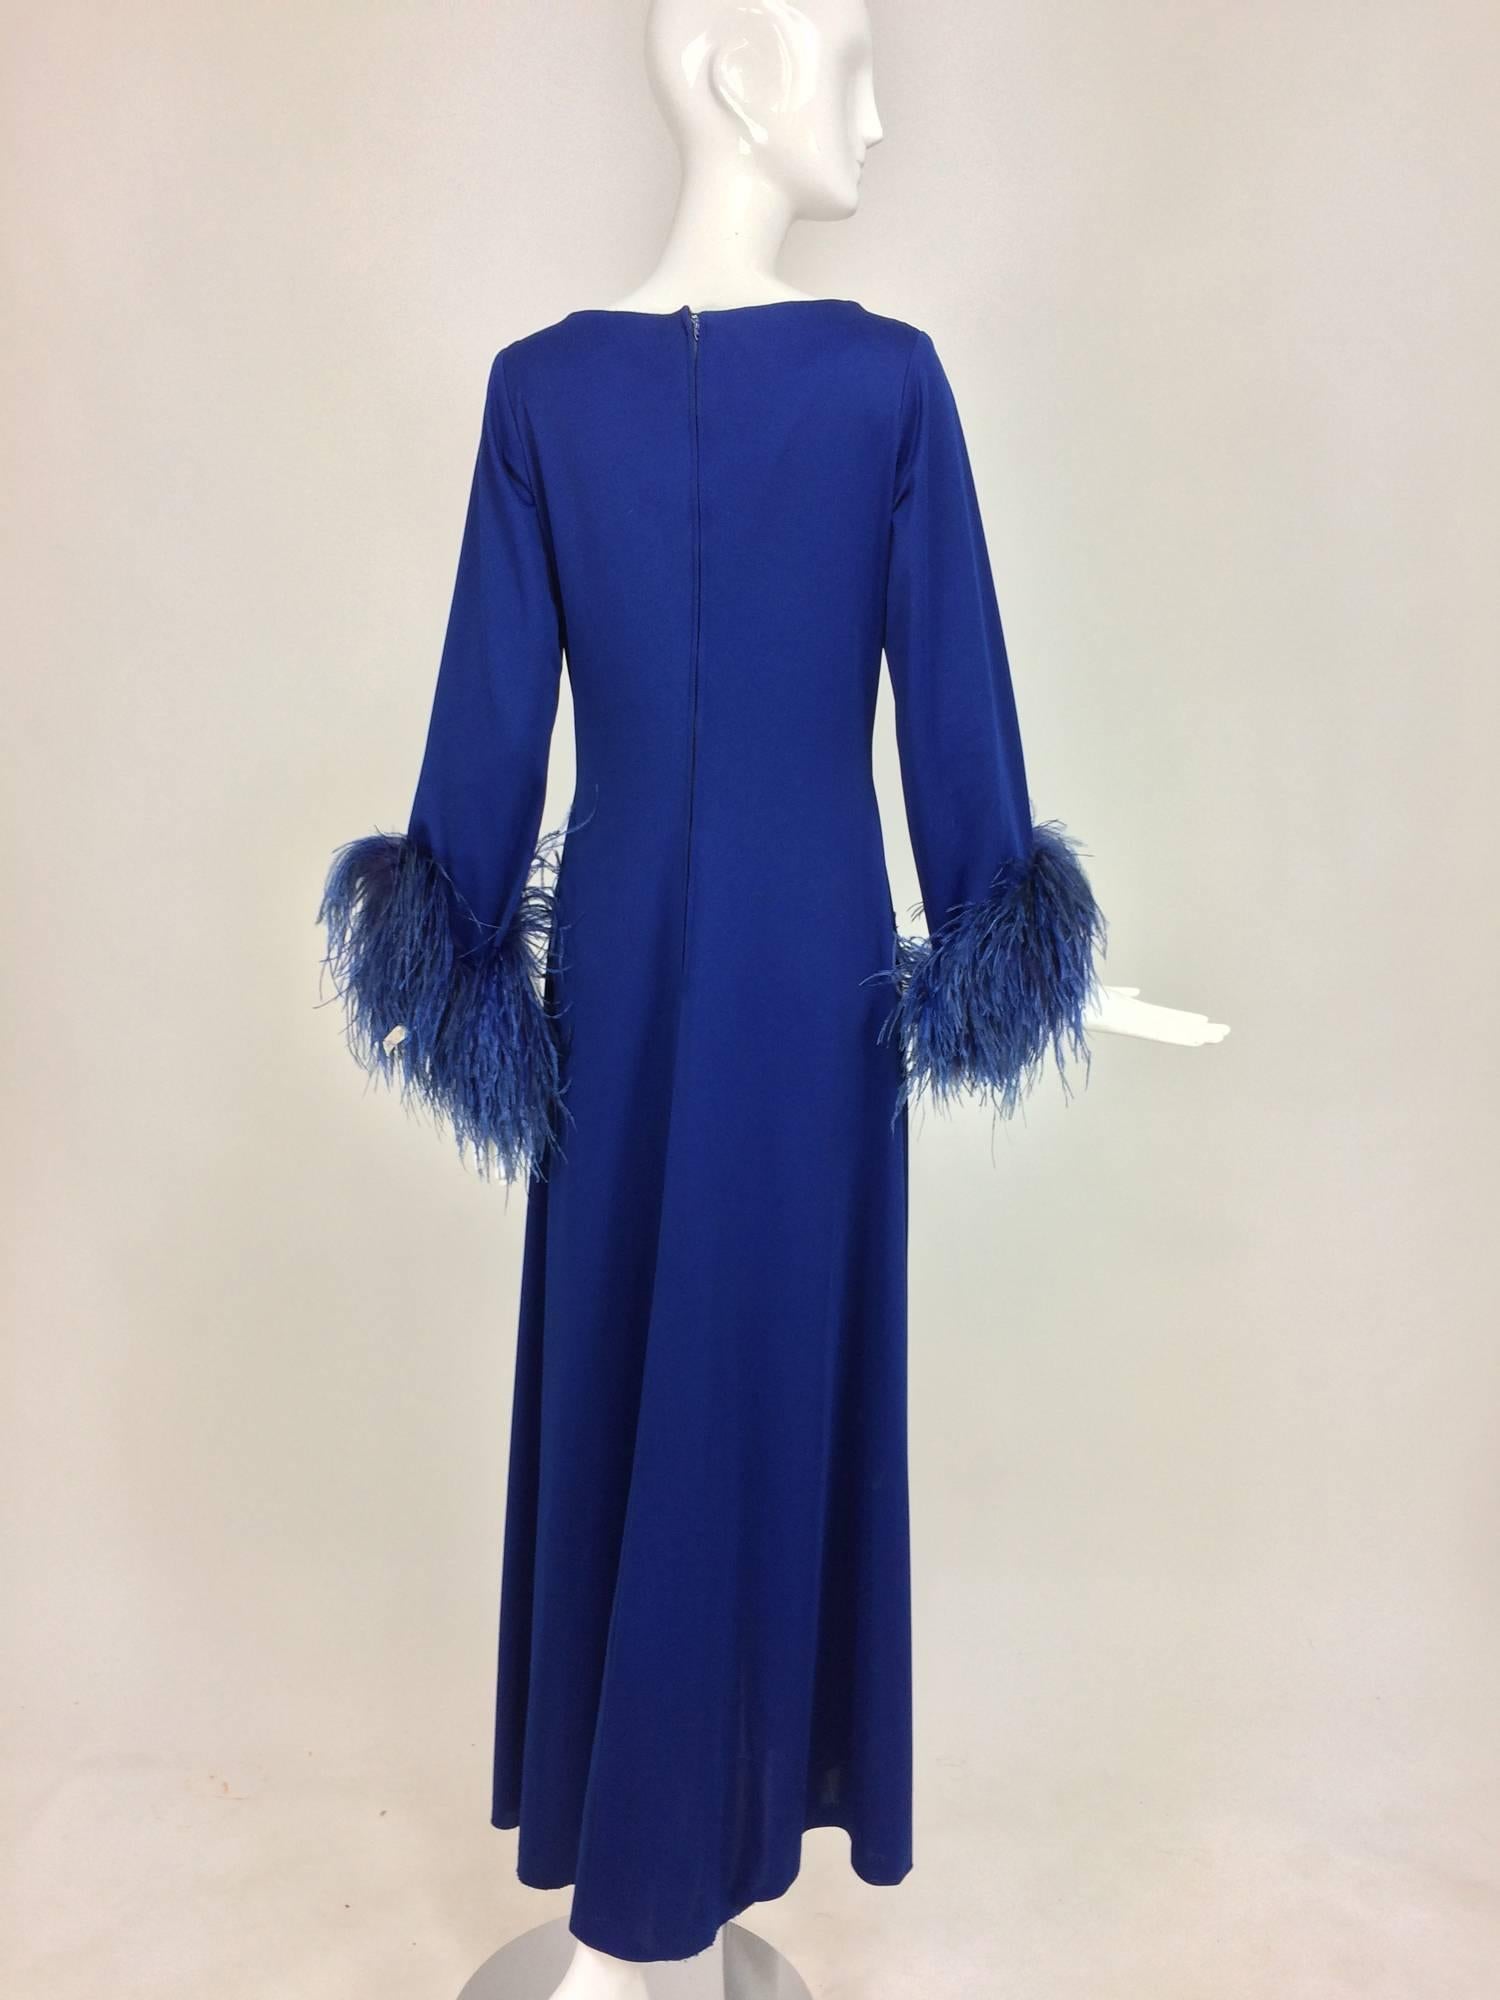 Women's Electric blue feather trimmed Jewel plunge neck maxi dress 1970s size 8